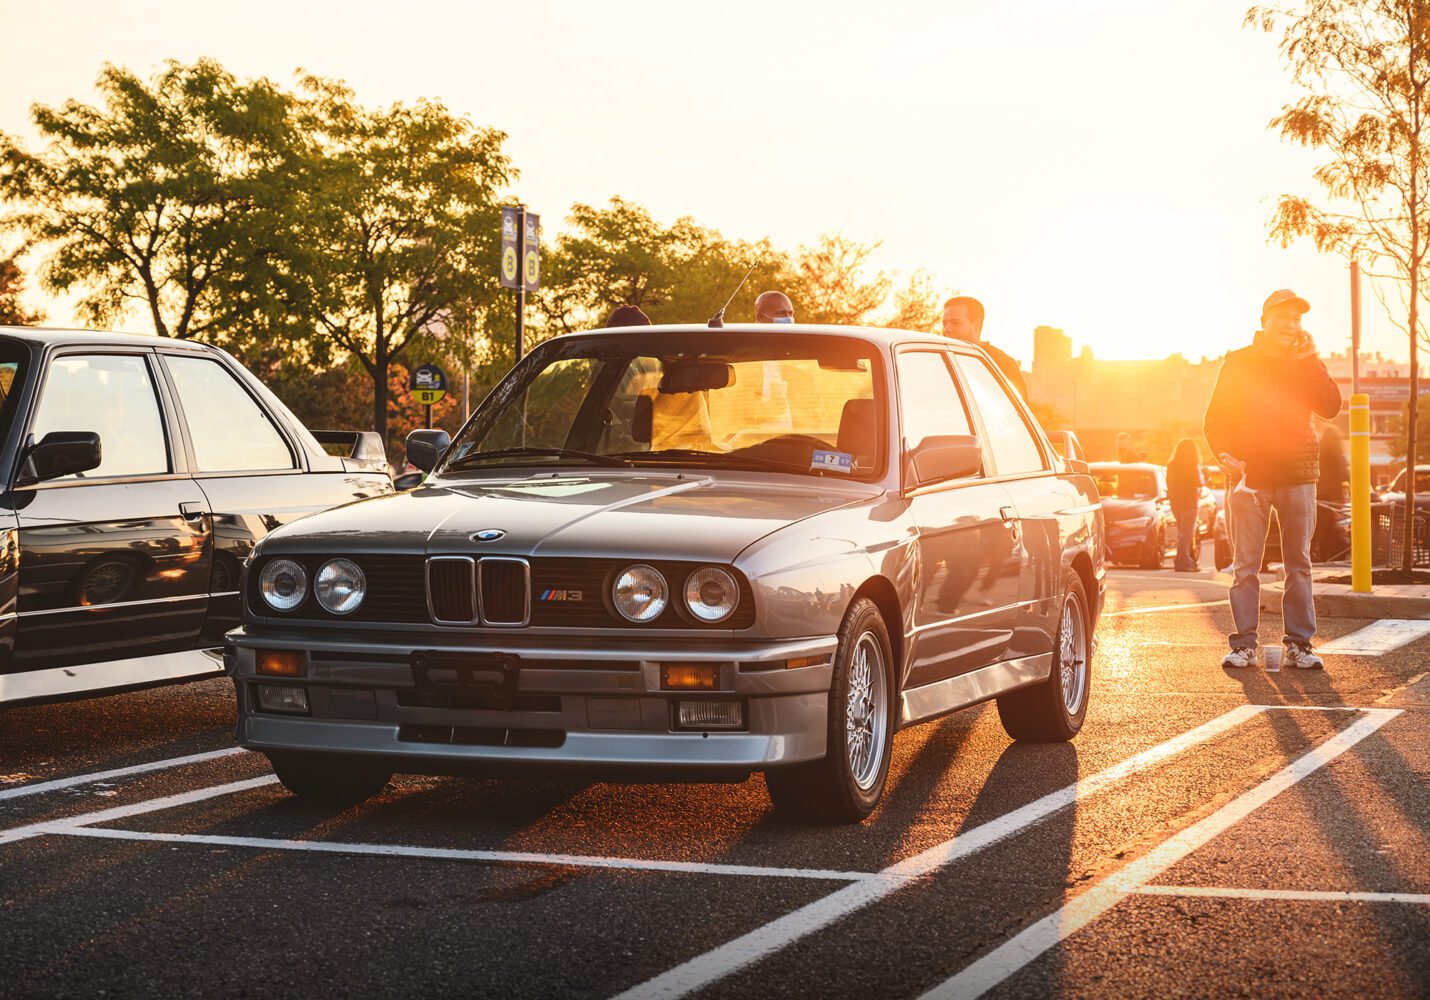 BMW M3 Fall Meet and Cruise